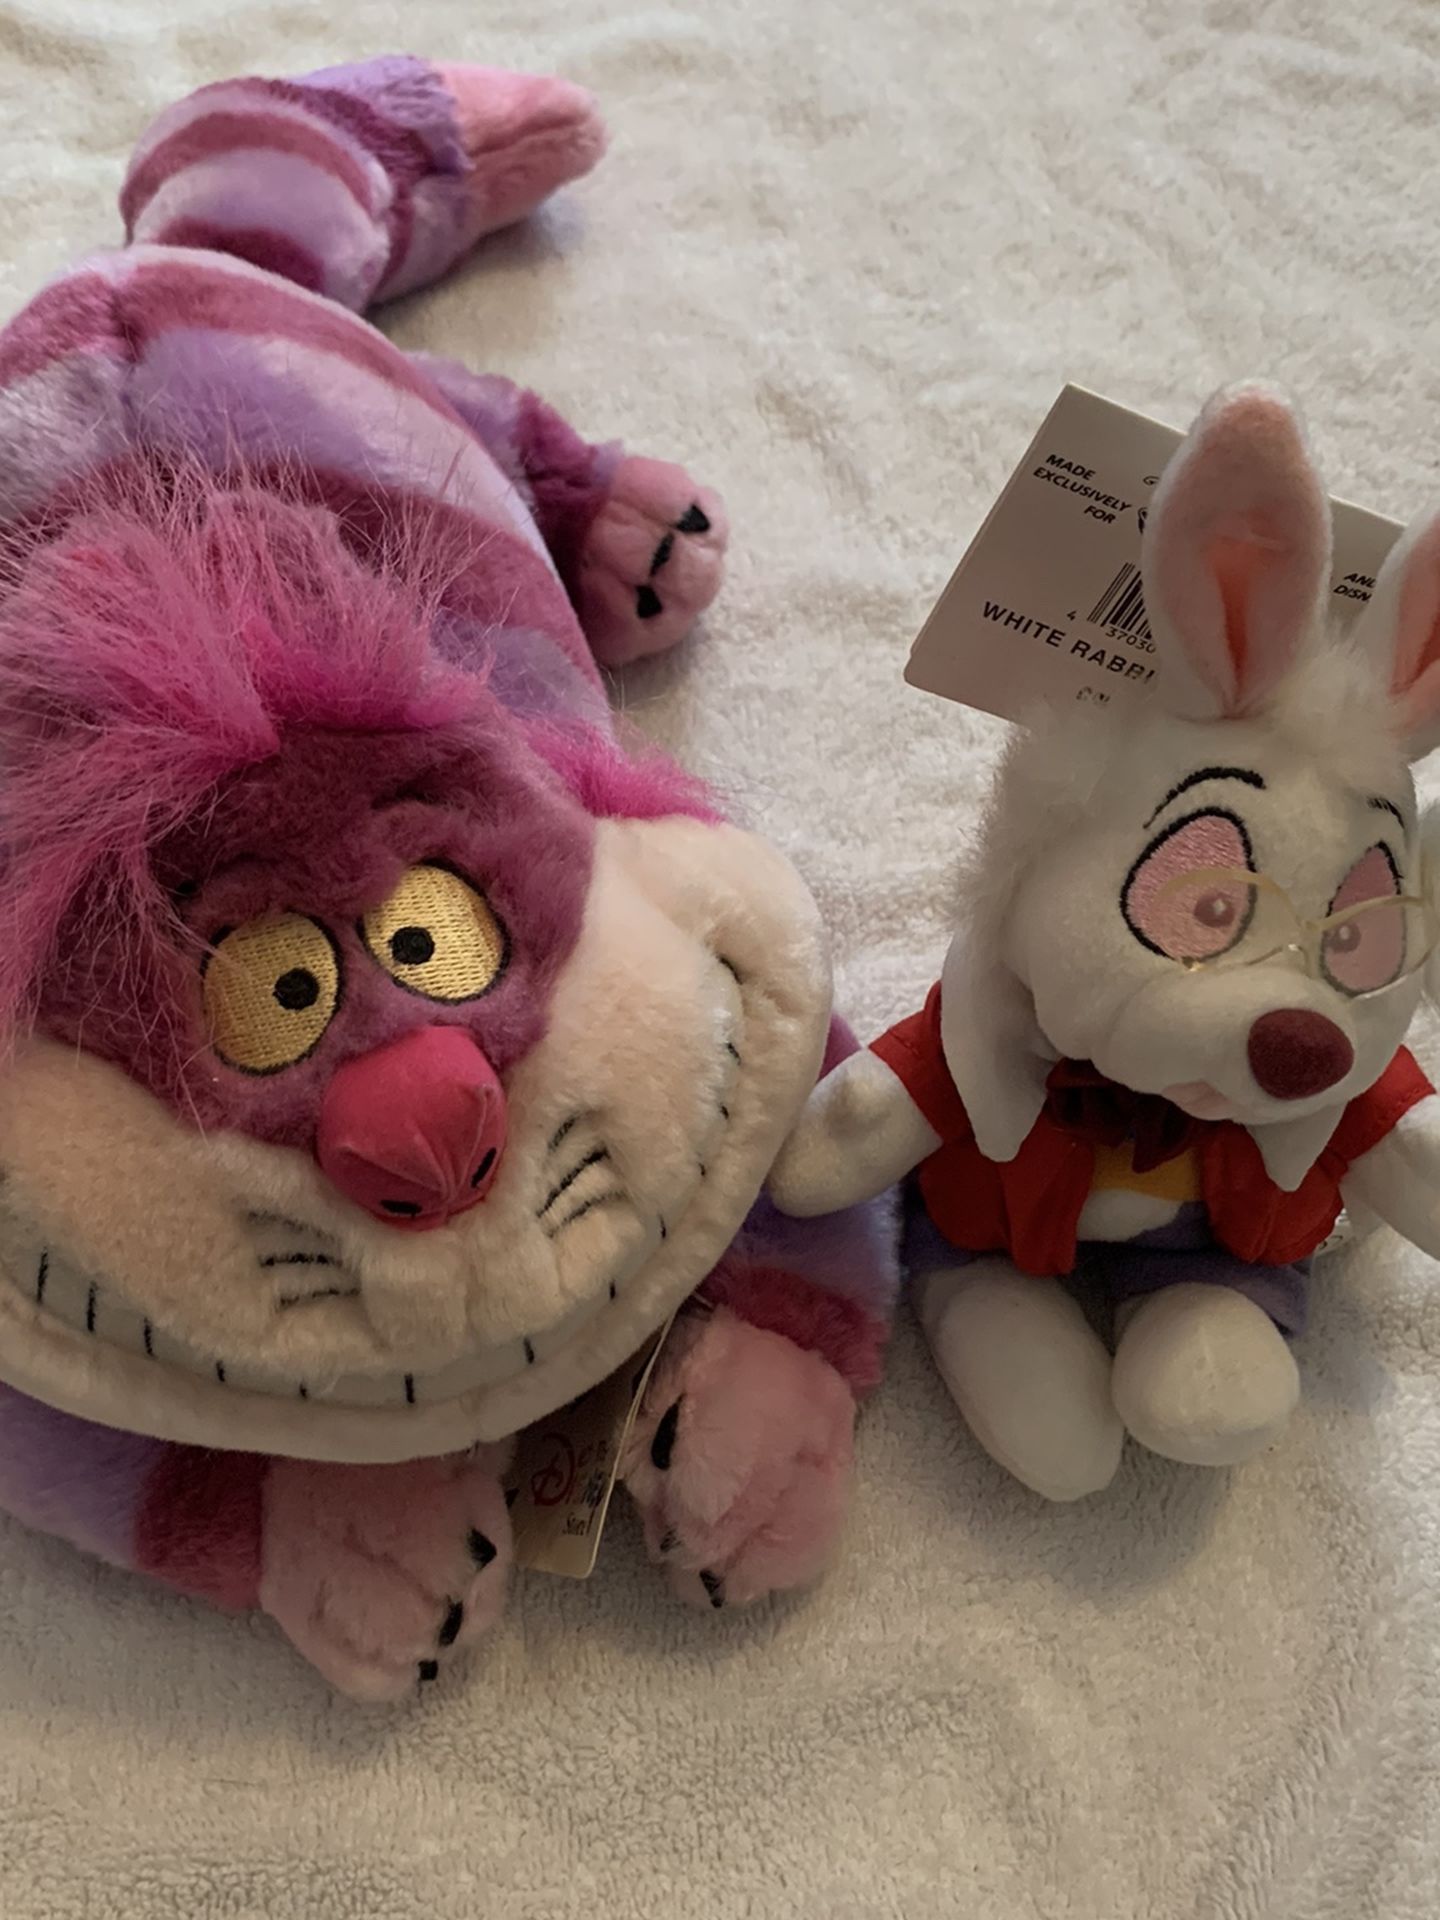 Vintage Disney Cheshire Cat and Whit Rabbit from Alice In Wonderland